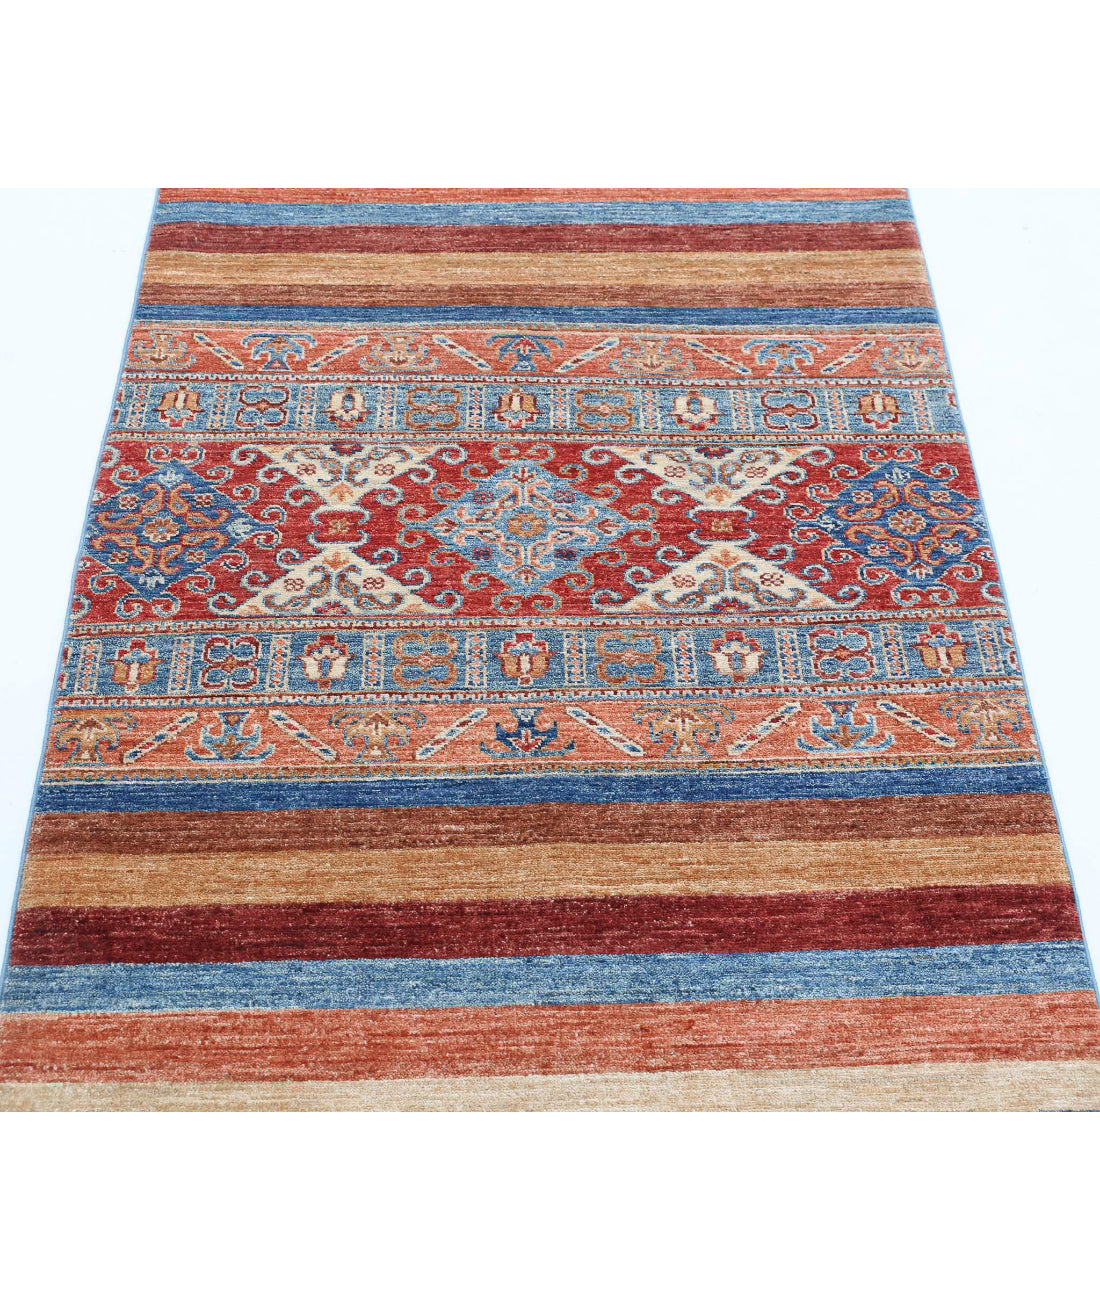 Hand Knotted Khurjeen Wool Rug - 2'11'' x 5'0'' 2'11'' x 5'0'' (88 X 150) / Multi / Multi